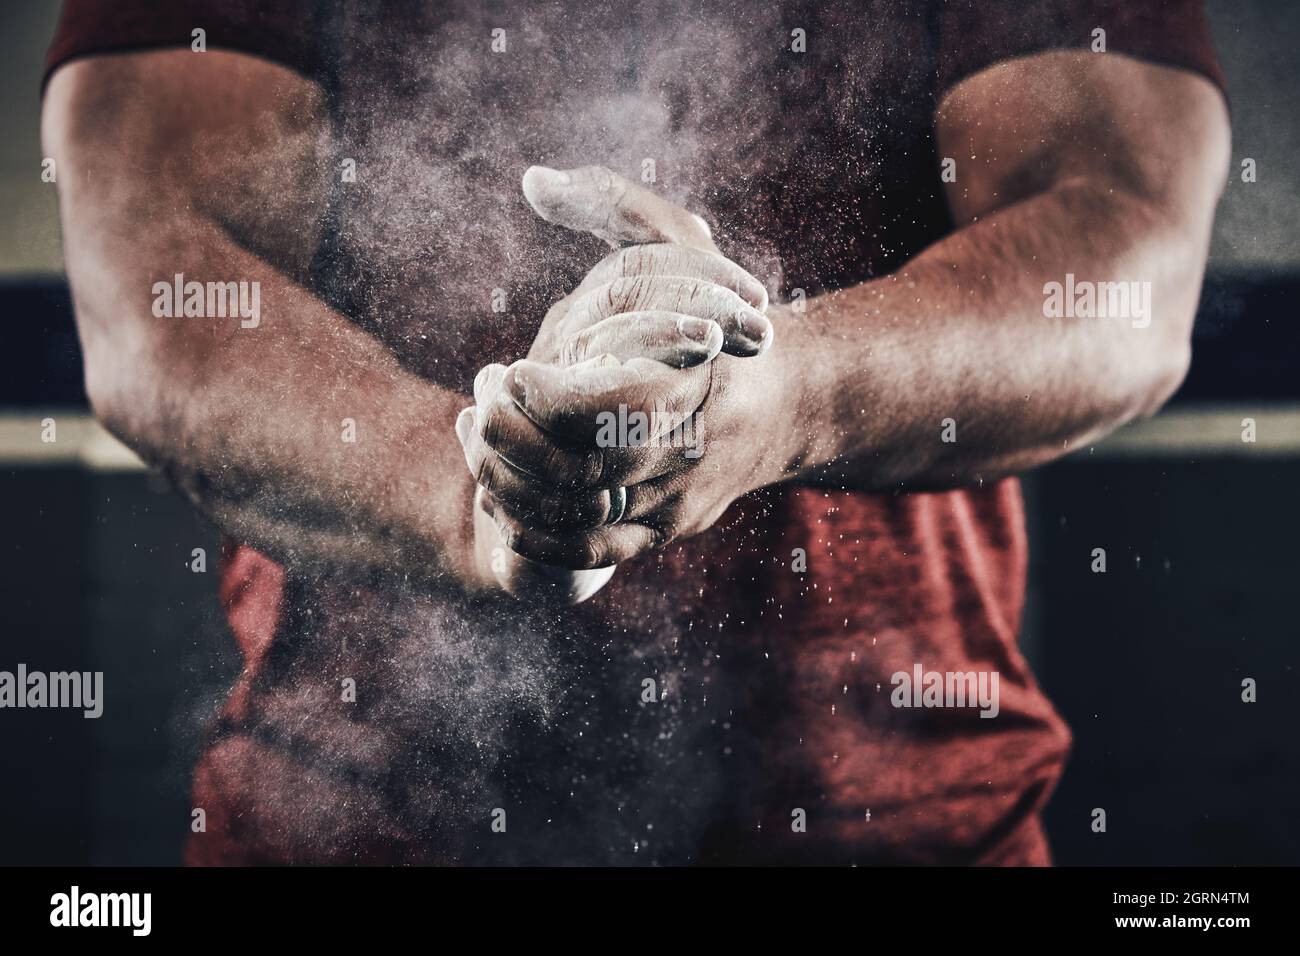 Athlete clapping hands with chalk dust for weight lifting Stock Photo